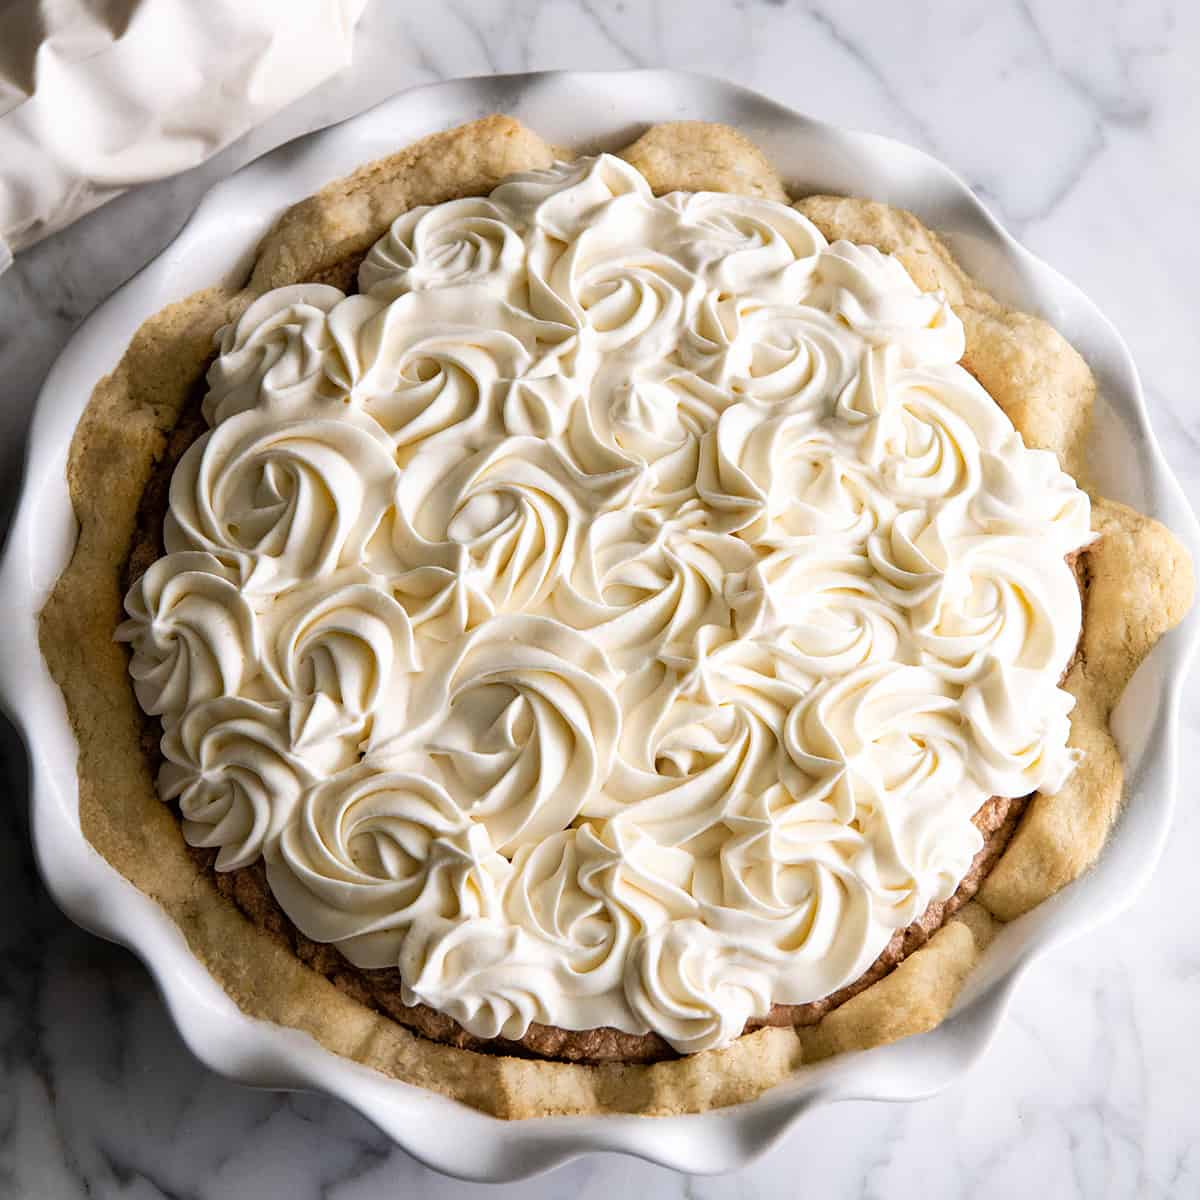 a pie decorated with Homemade Whipped Cream rosettes 